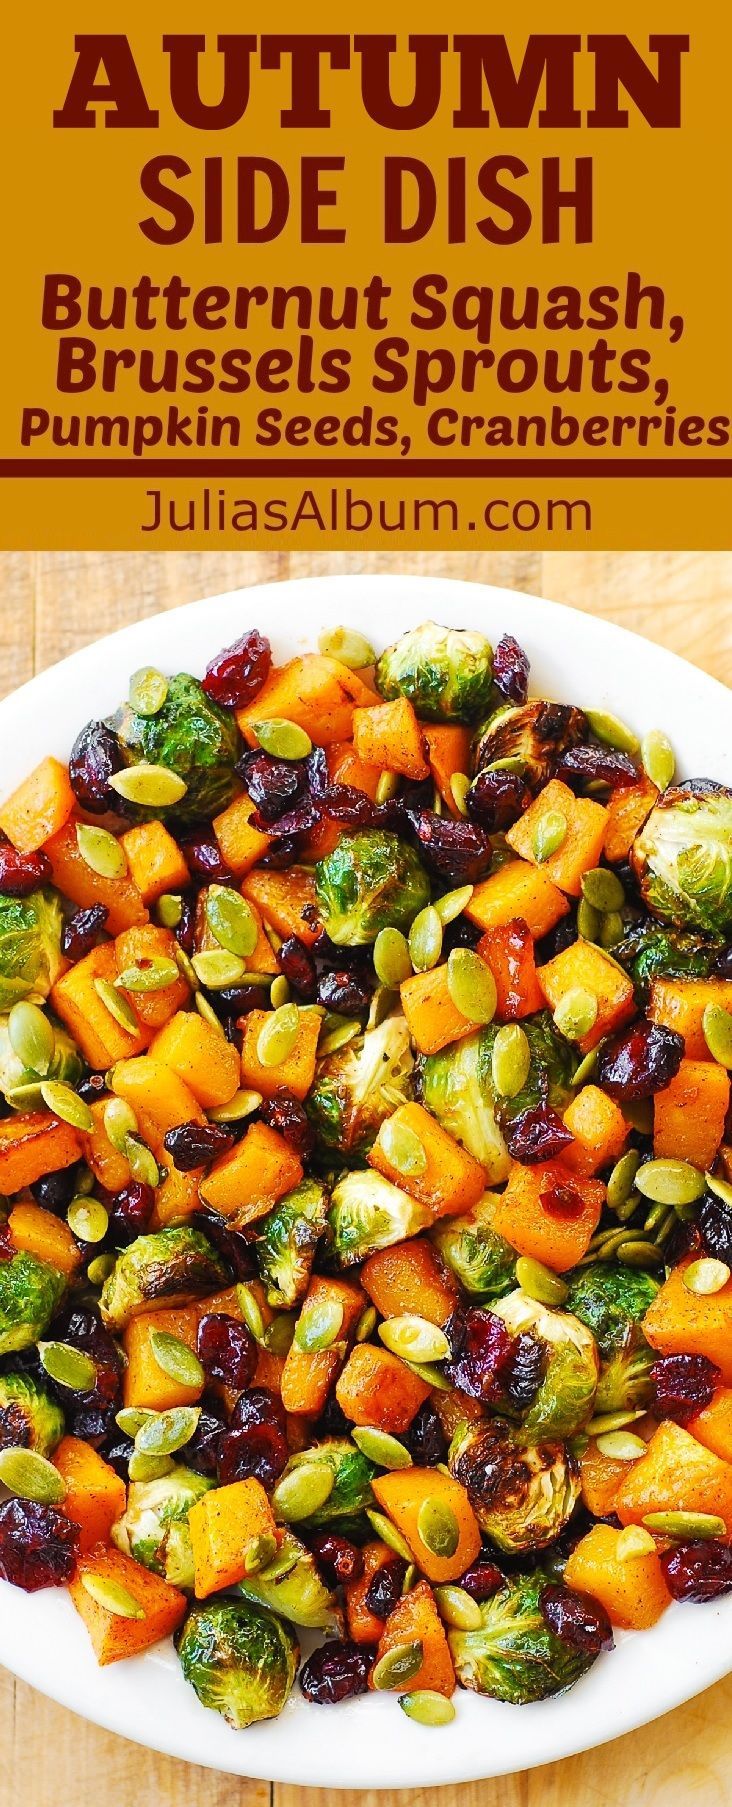 Autumn, Thanksgiving Holiday Side Dish: Maple Butternut Squash, Roasted Brussels Sprouts, Pumpkin Seeds, and Cranberries